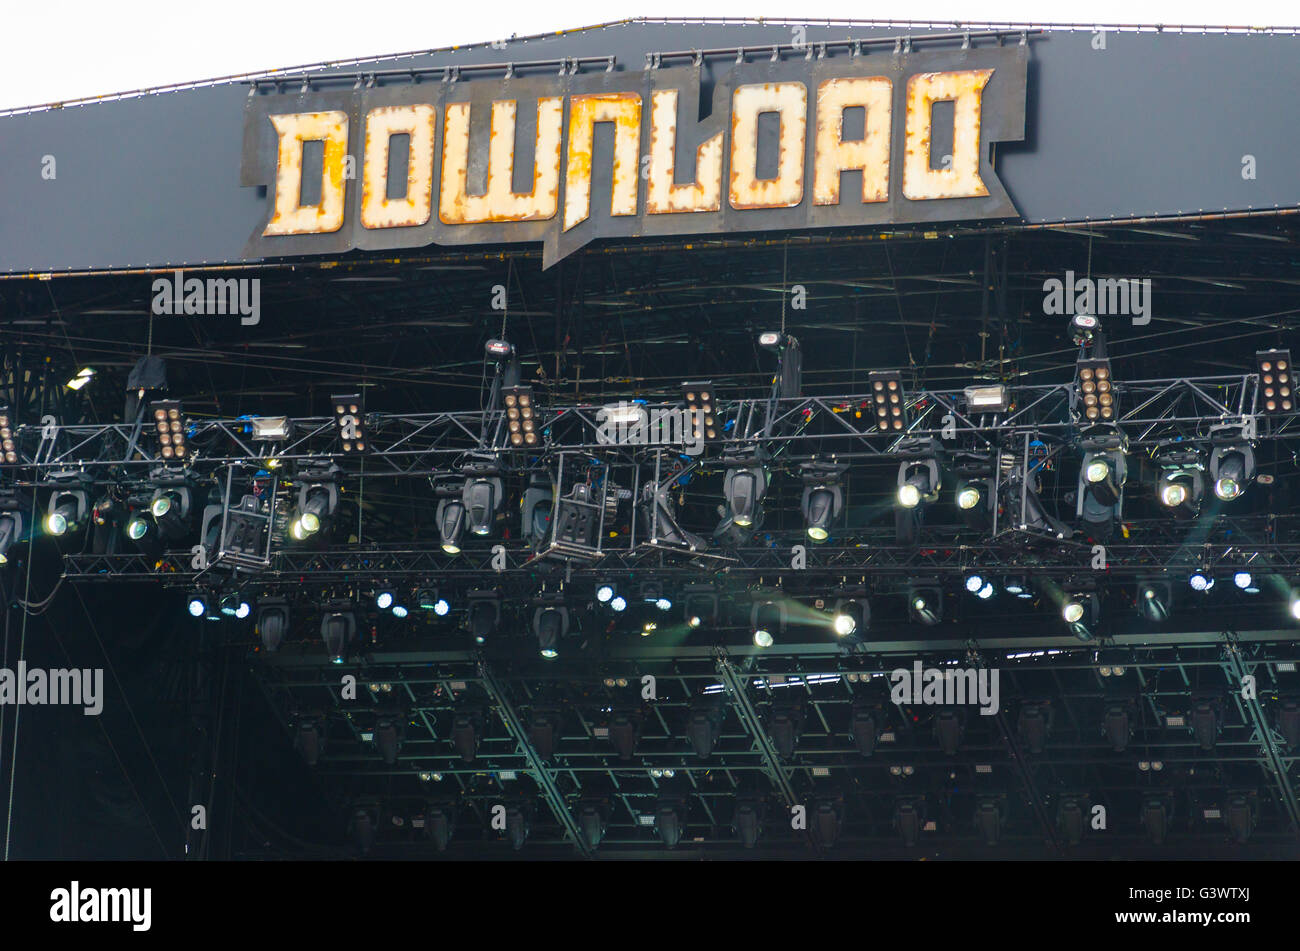 download music festival main stage upper rigging and logo Stock Photo